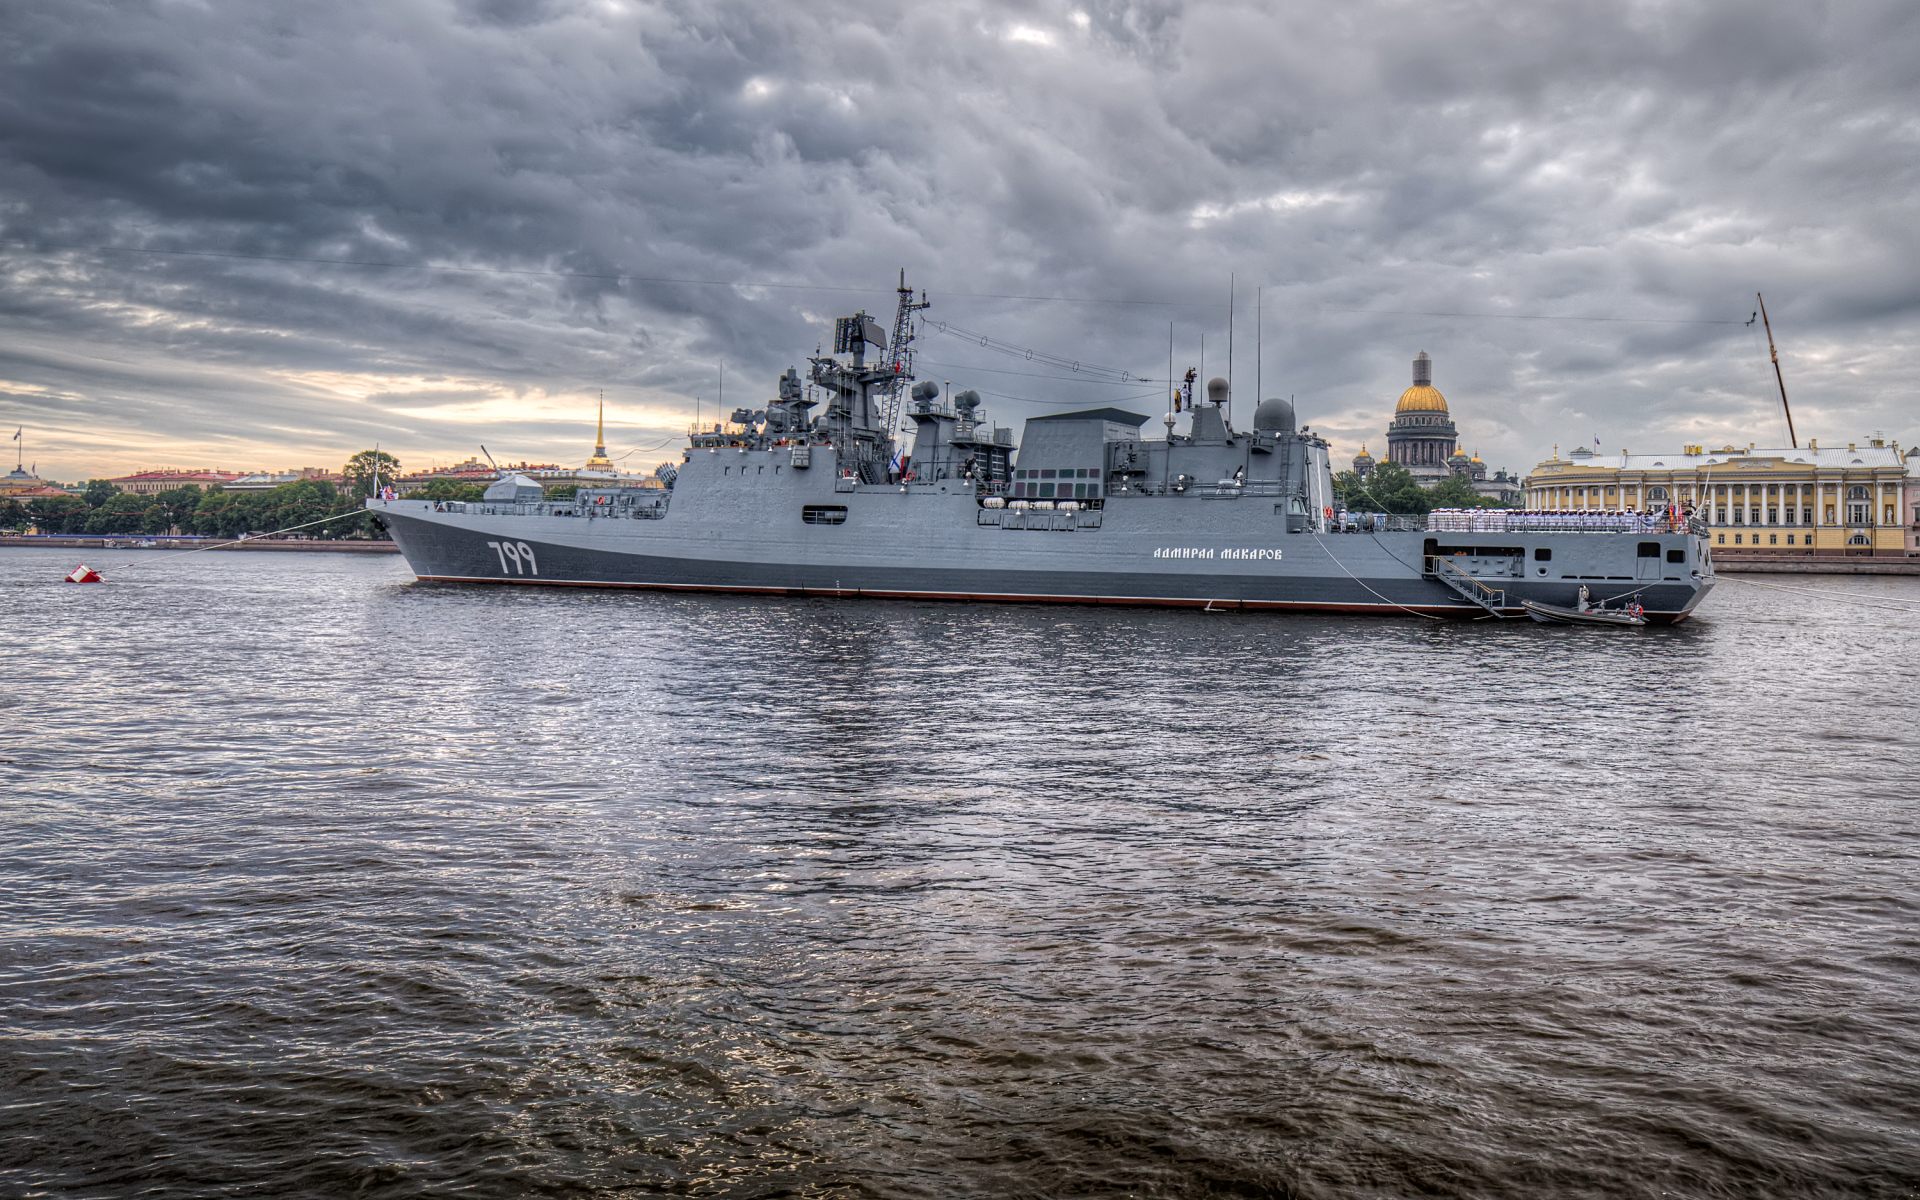 Large Russian frigate Admiral Makarov on the water